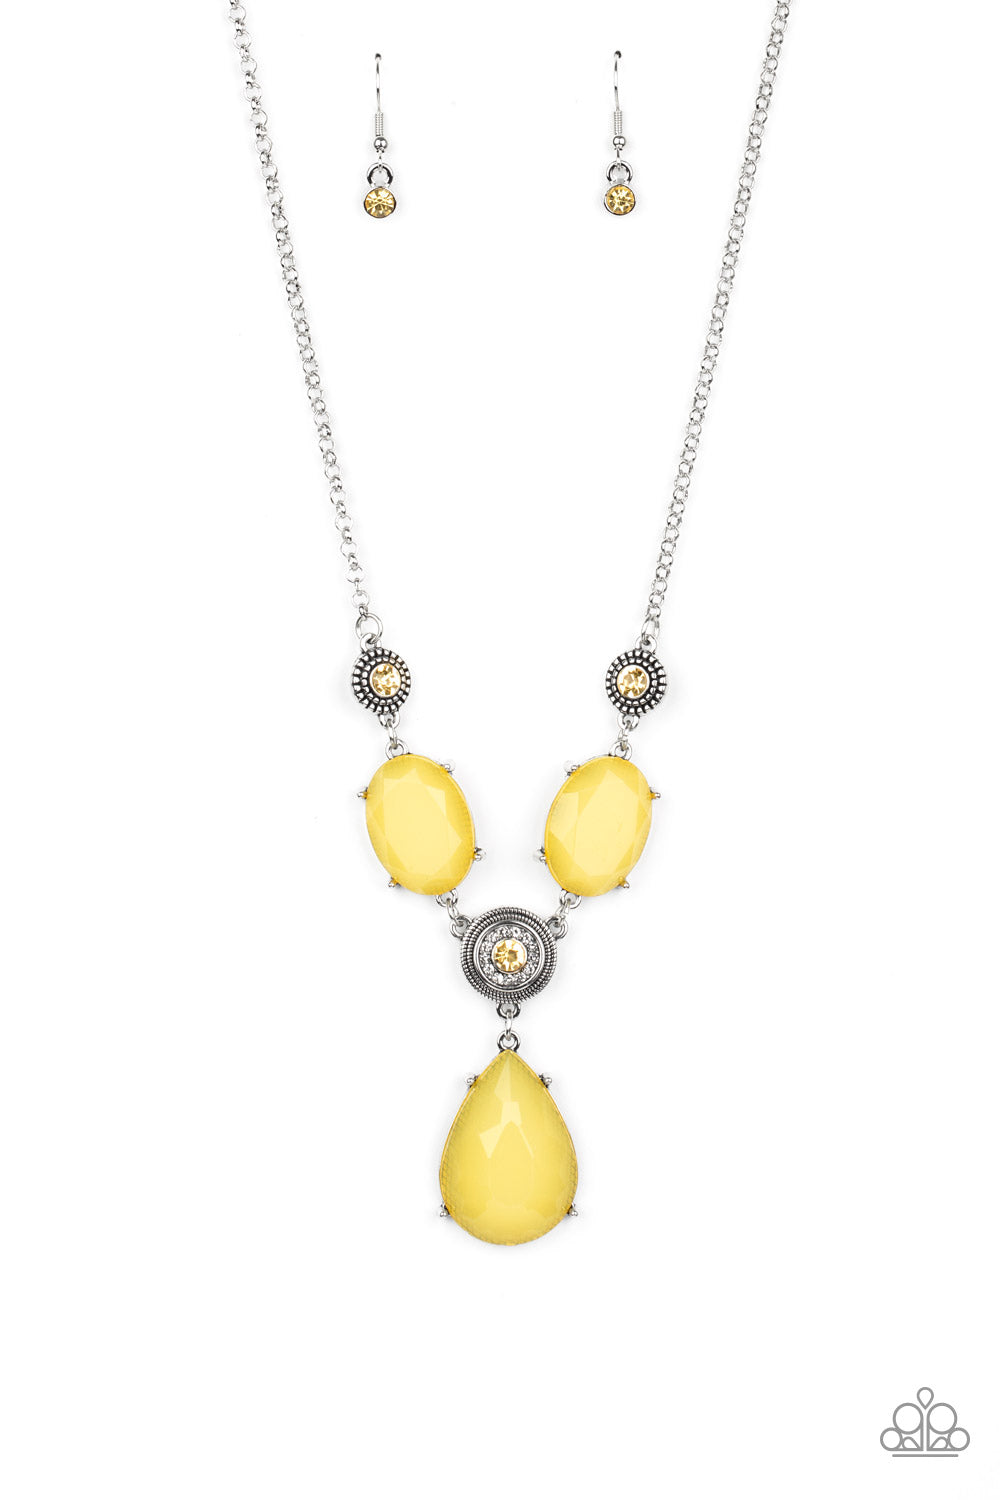 Paparazzi Heirloom Hideaway - Yellow Necklace - A Finishing Touch Jewelry